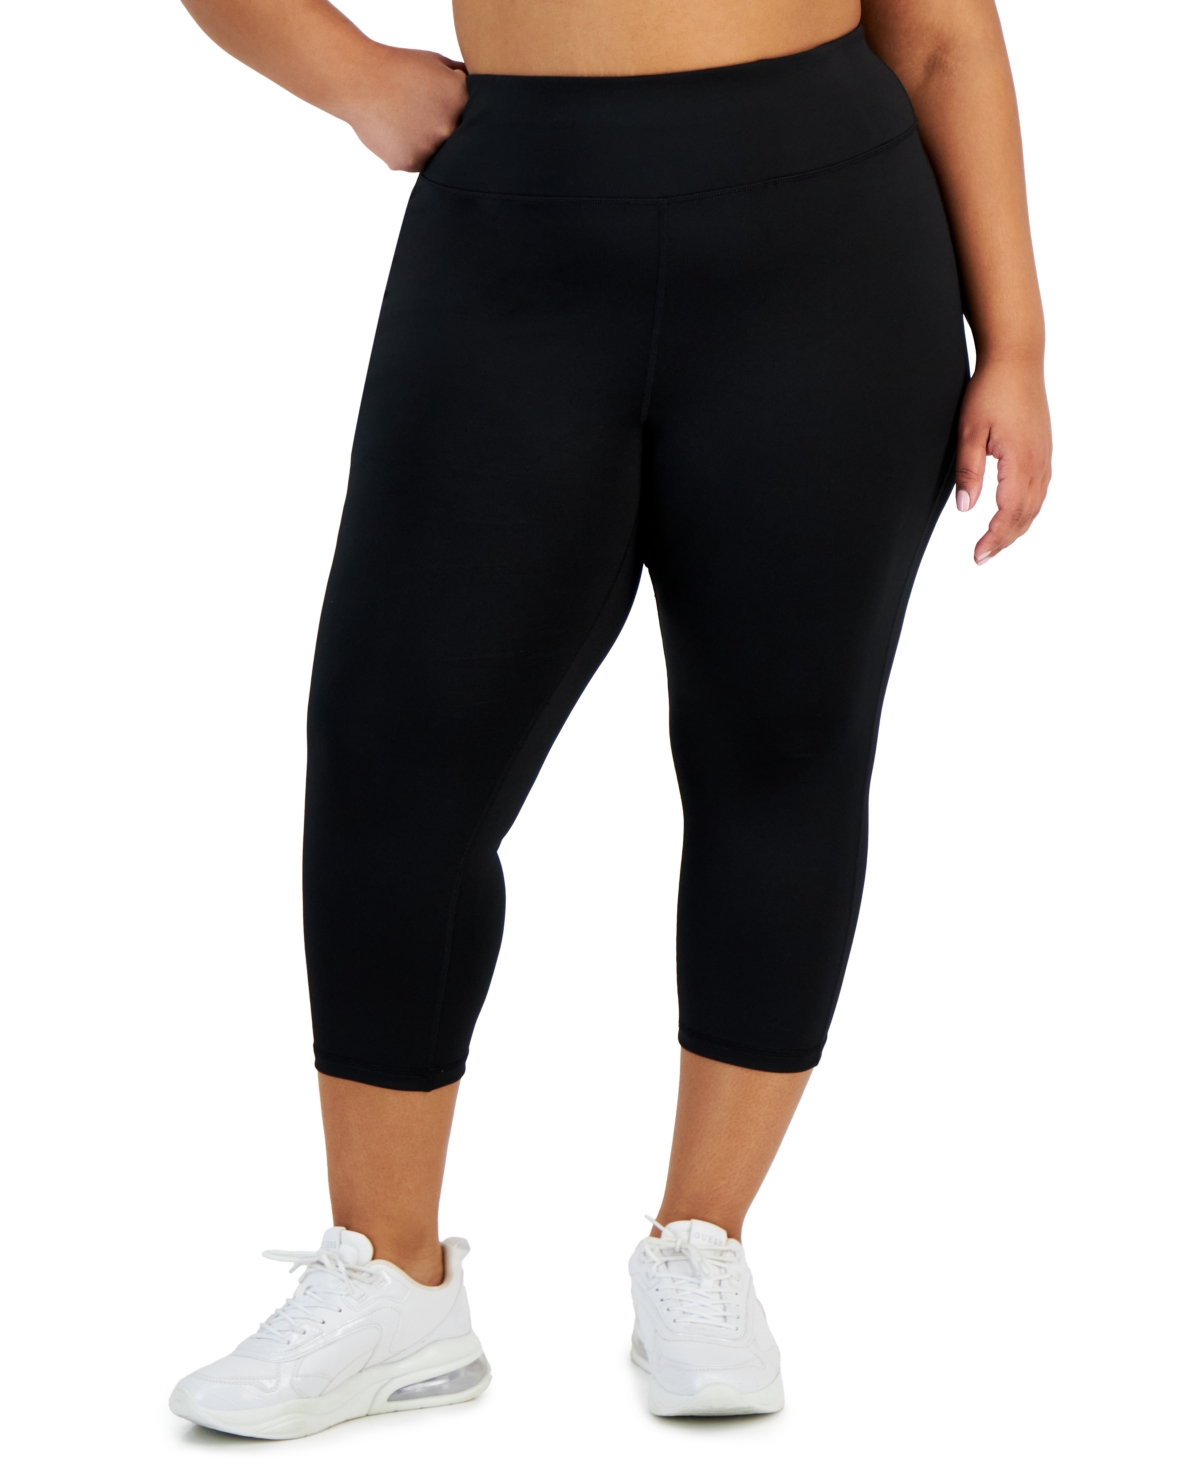 Plus Size Women's Solid 7/8 Cropped Leggings, Created for Macy's - Deep Black